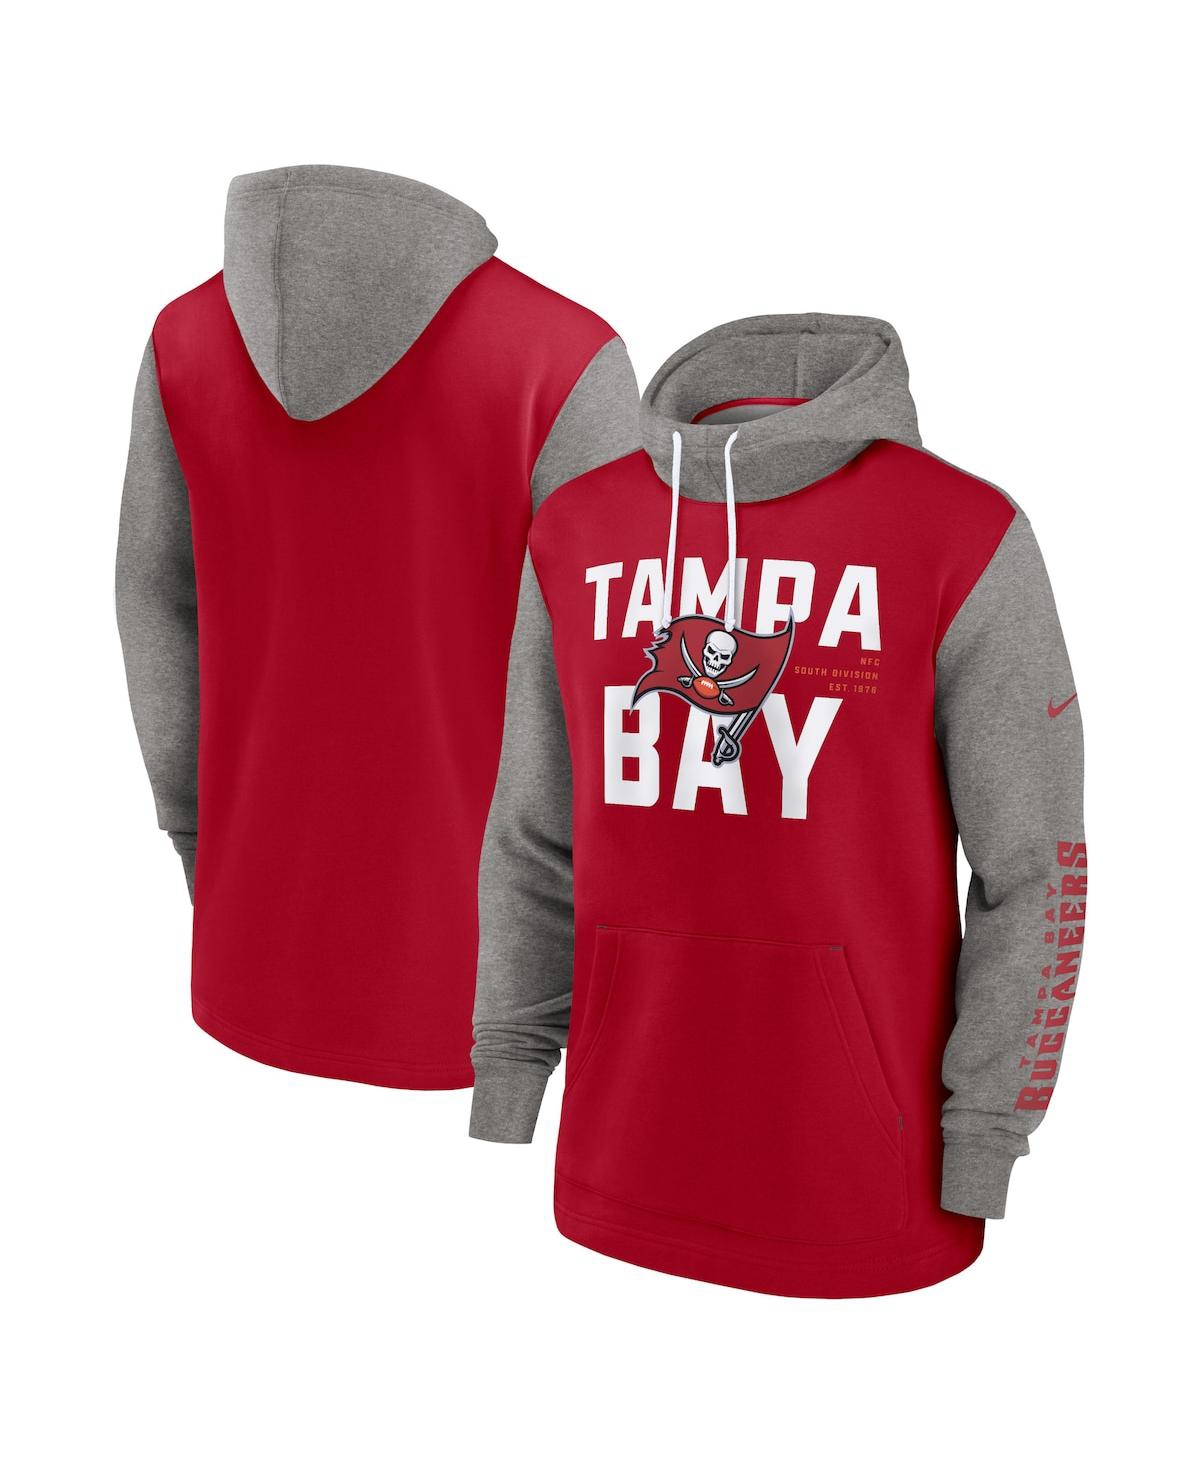 Nike Men's  Red Tampa Bay Buccaneers Fashion Color Block Pullover Hoodie